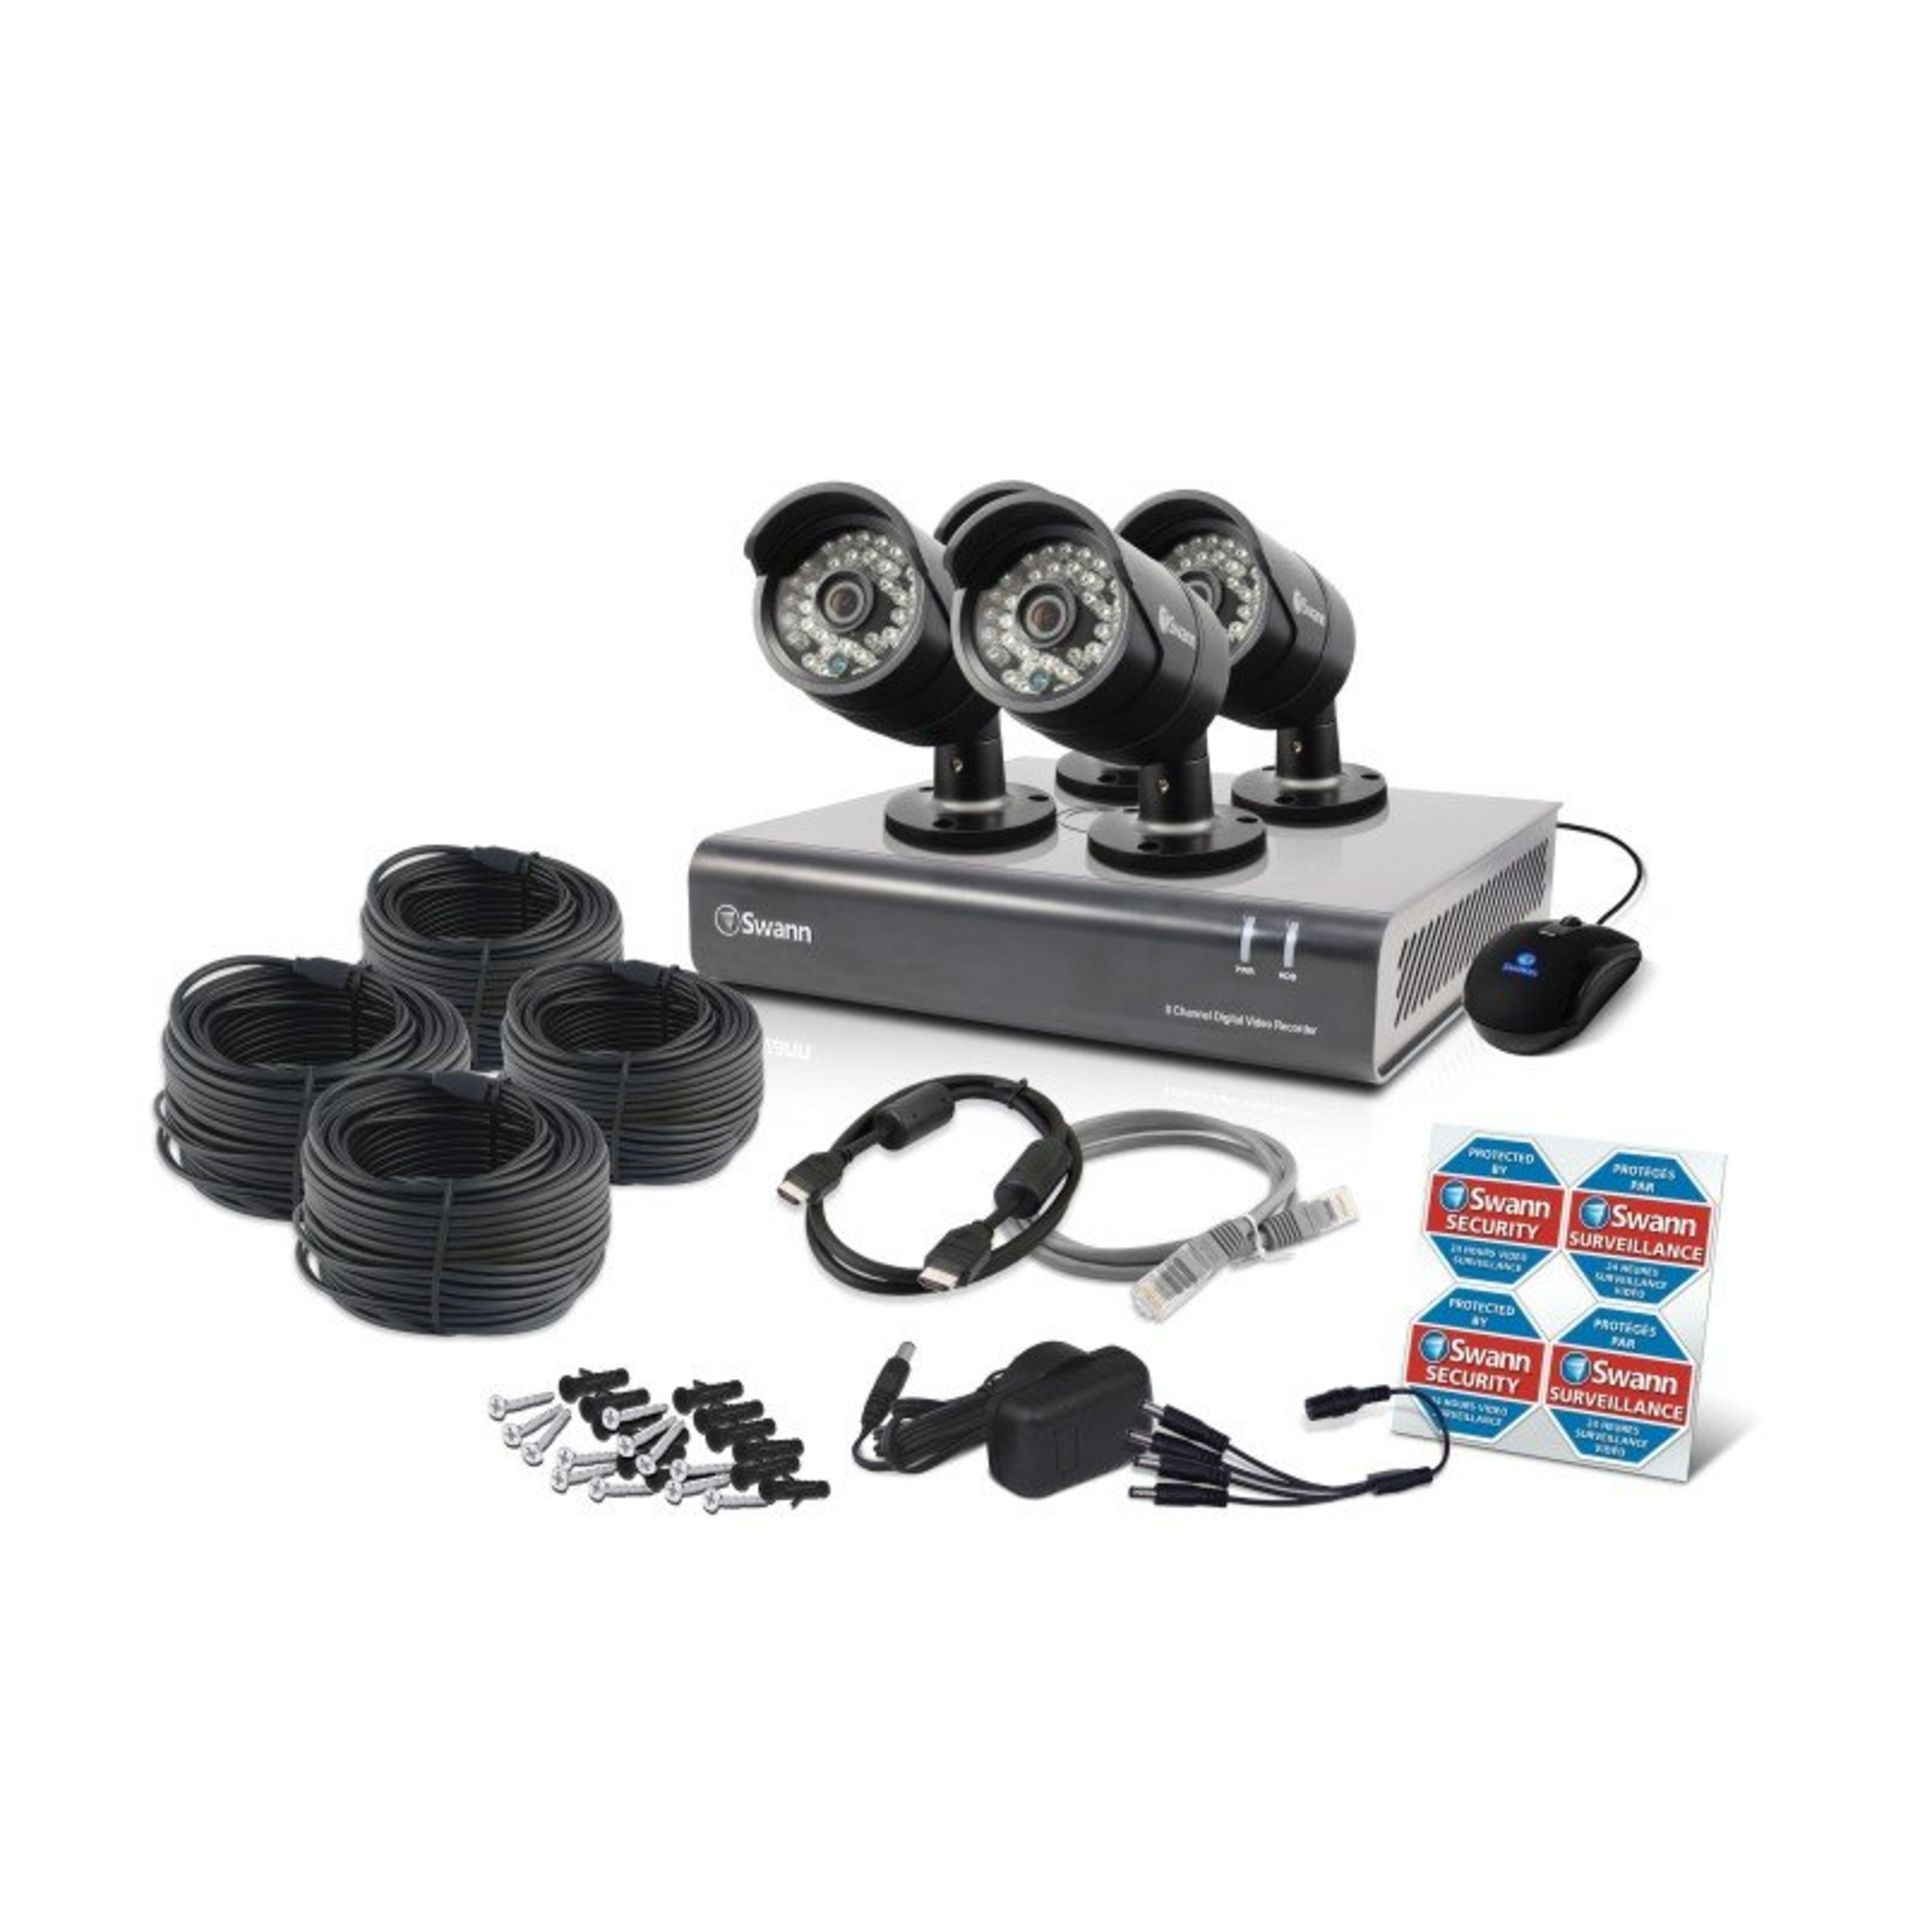 V Grade A Swann DVR8-1525 8 Channel 500gb 960h Dvr With 4 x PRO-615 Cameras - Motion Detection - - Image 2 of 2